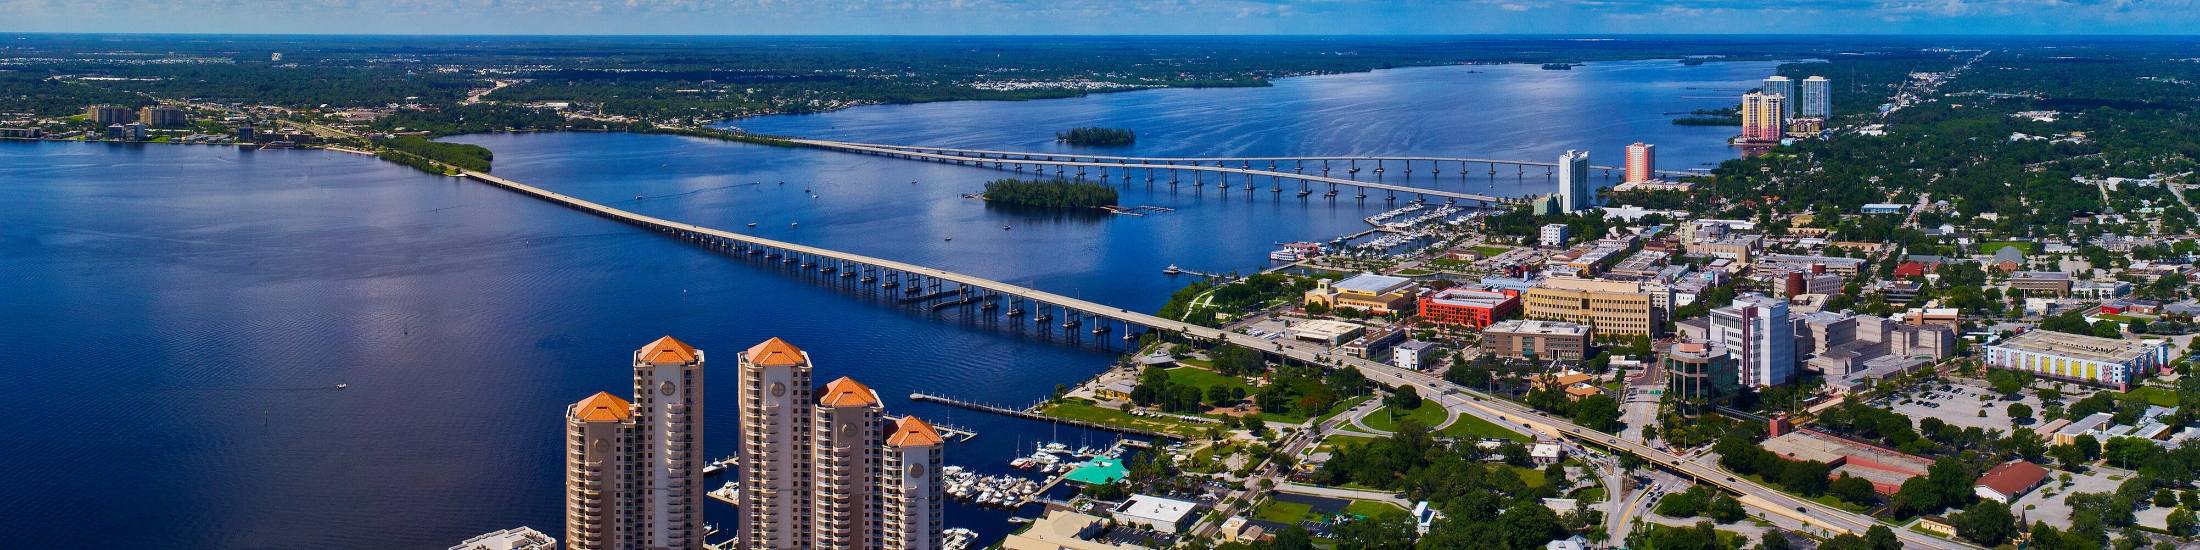 Waterway Estates Homes for Sale & North Fort Myers Real Estate for sale by The Koffman Group